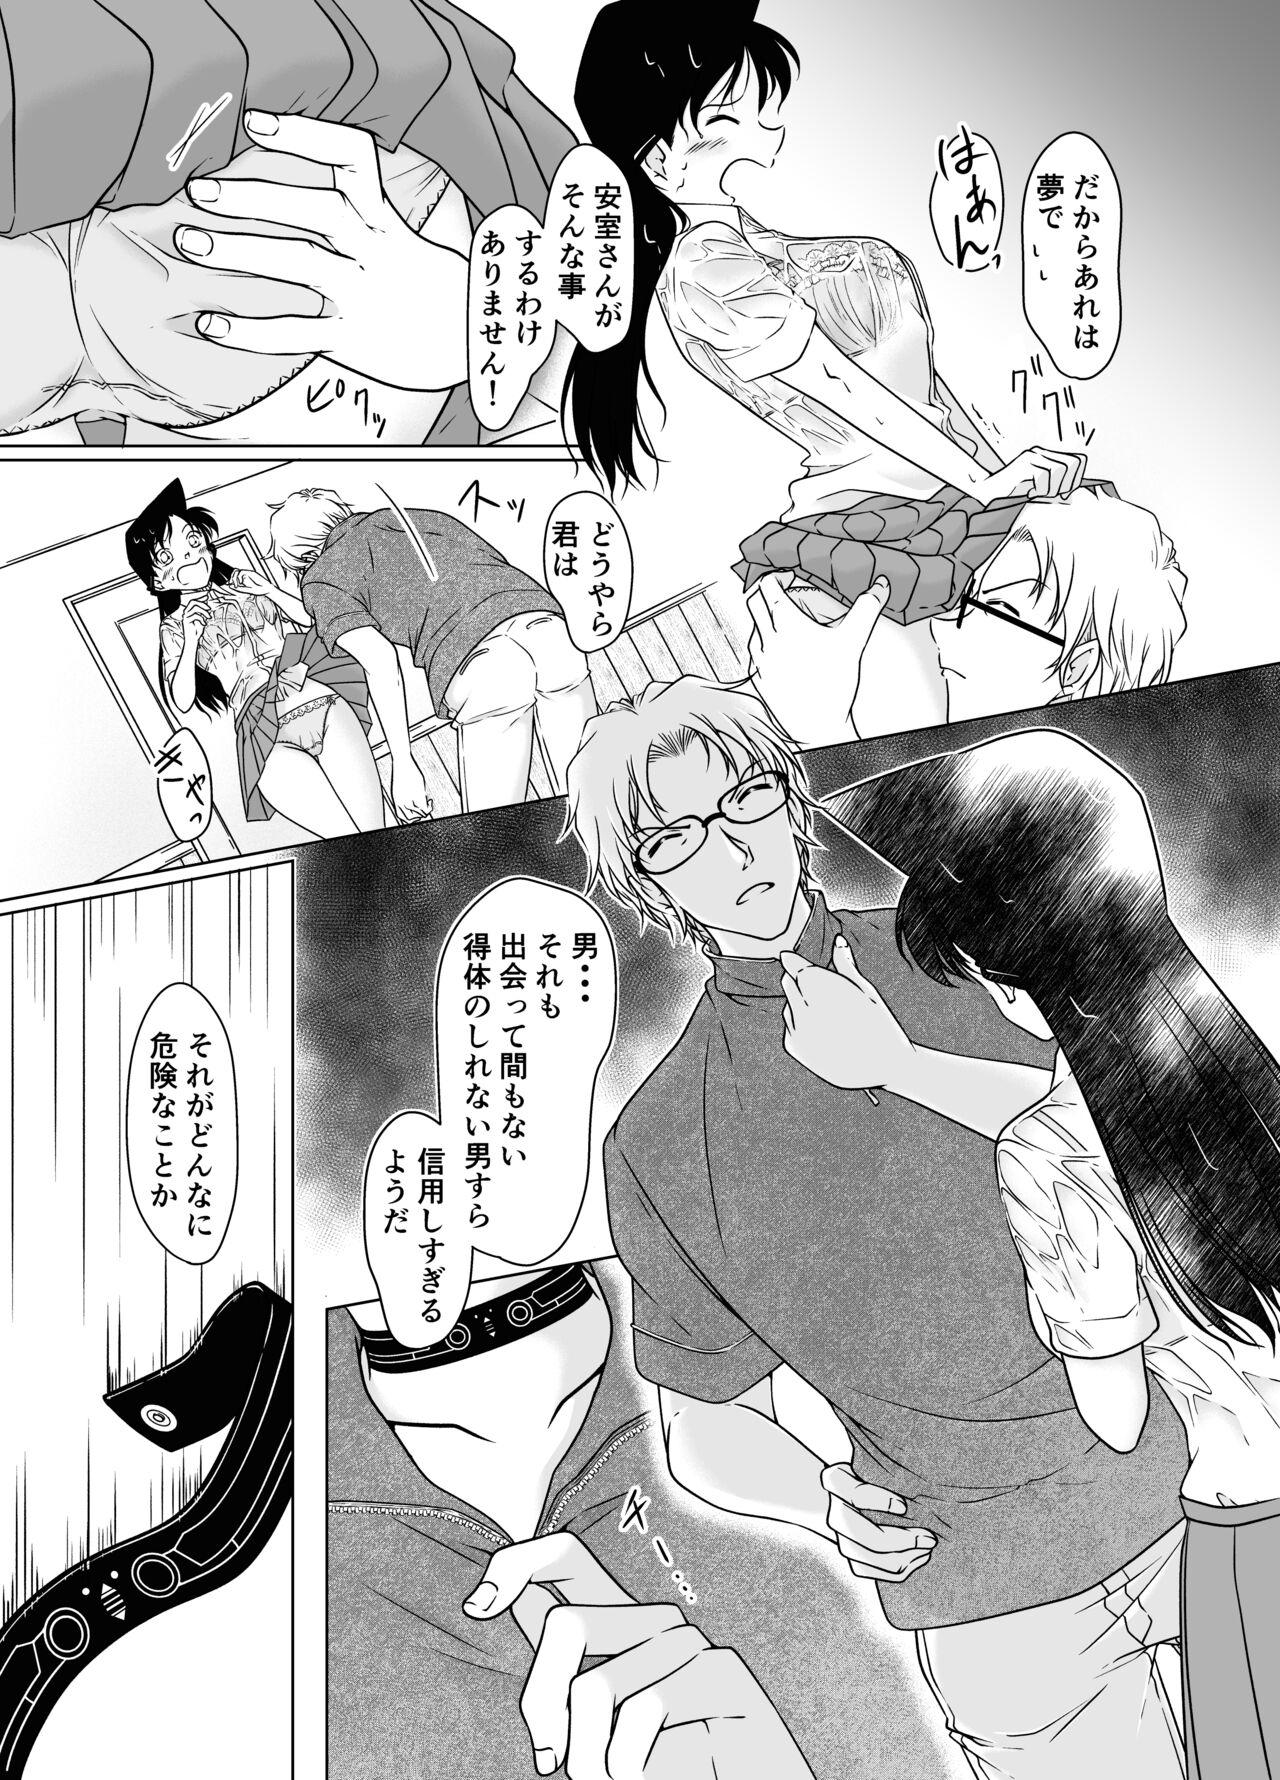 Her 【Detective Conan】Something is wrong in the afternoon - Detective conan | meitantei conan Wetpussy - Page 10